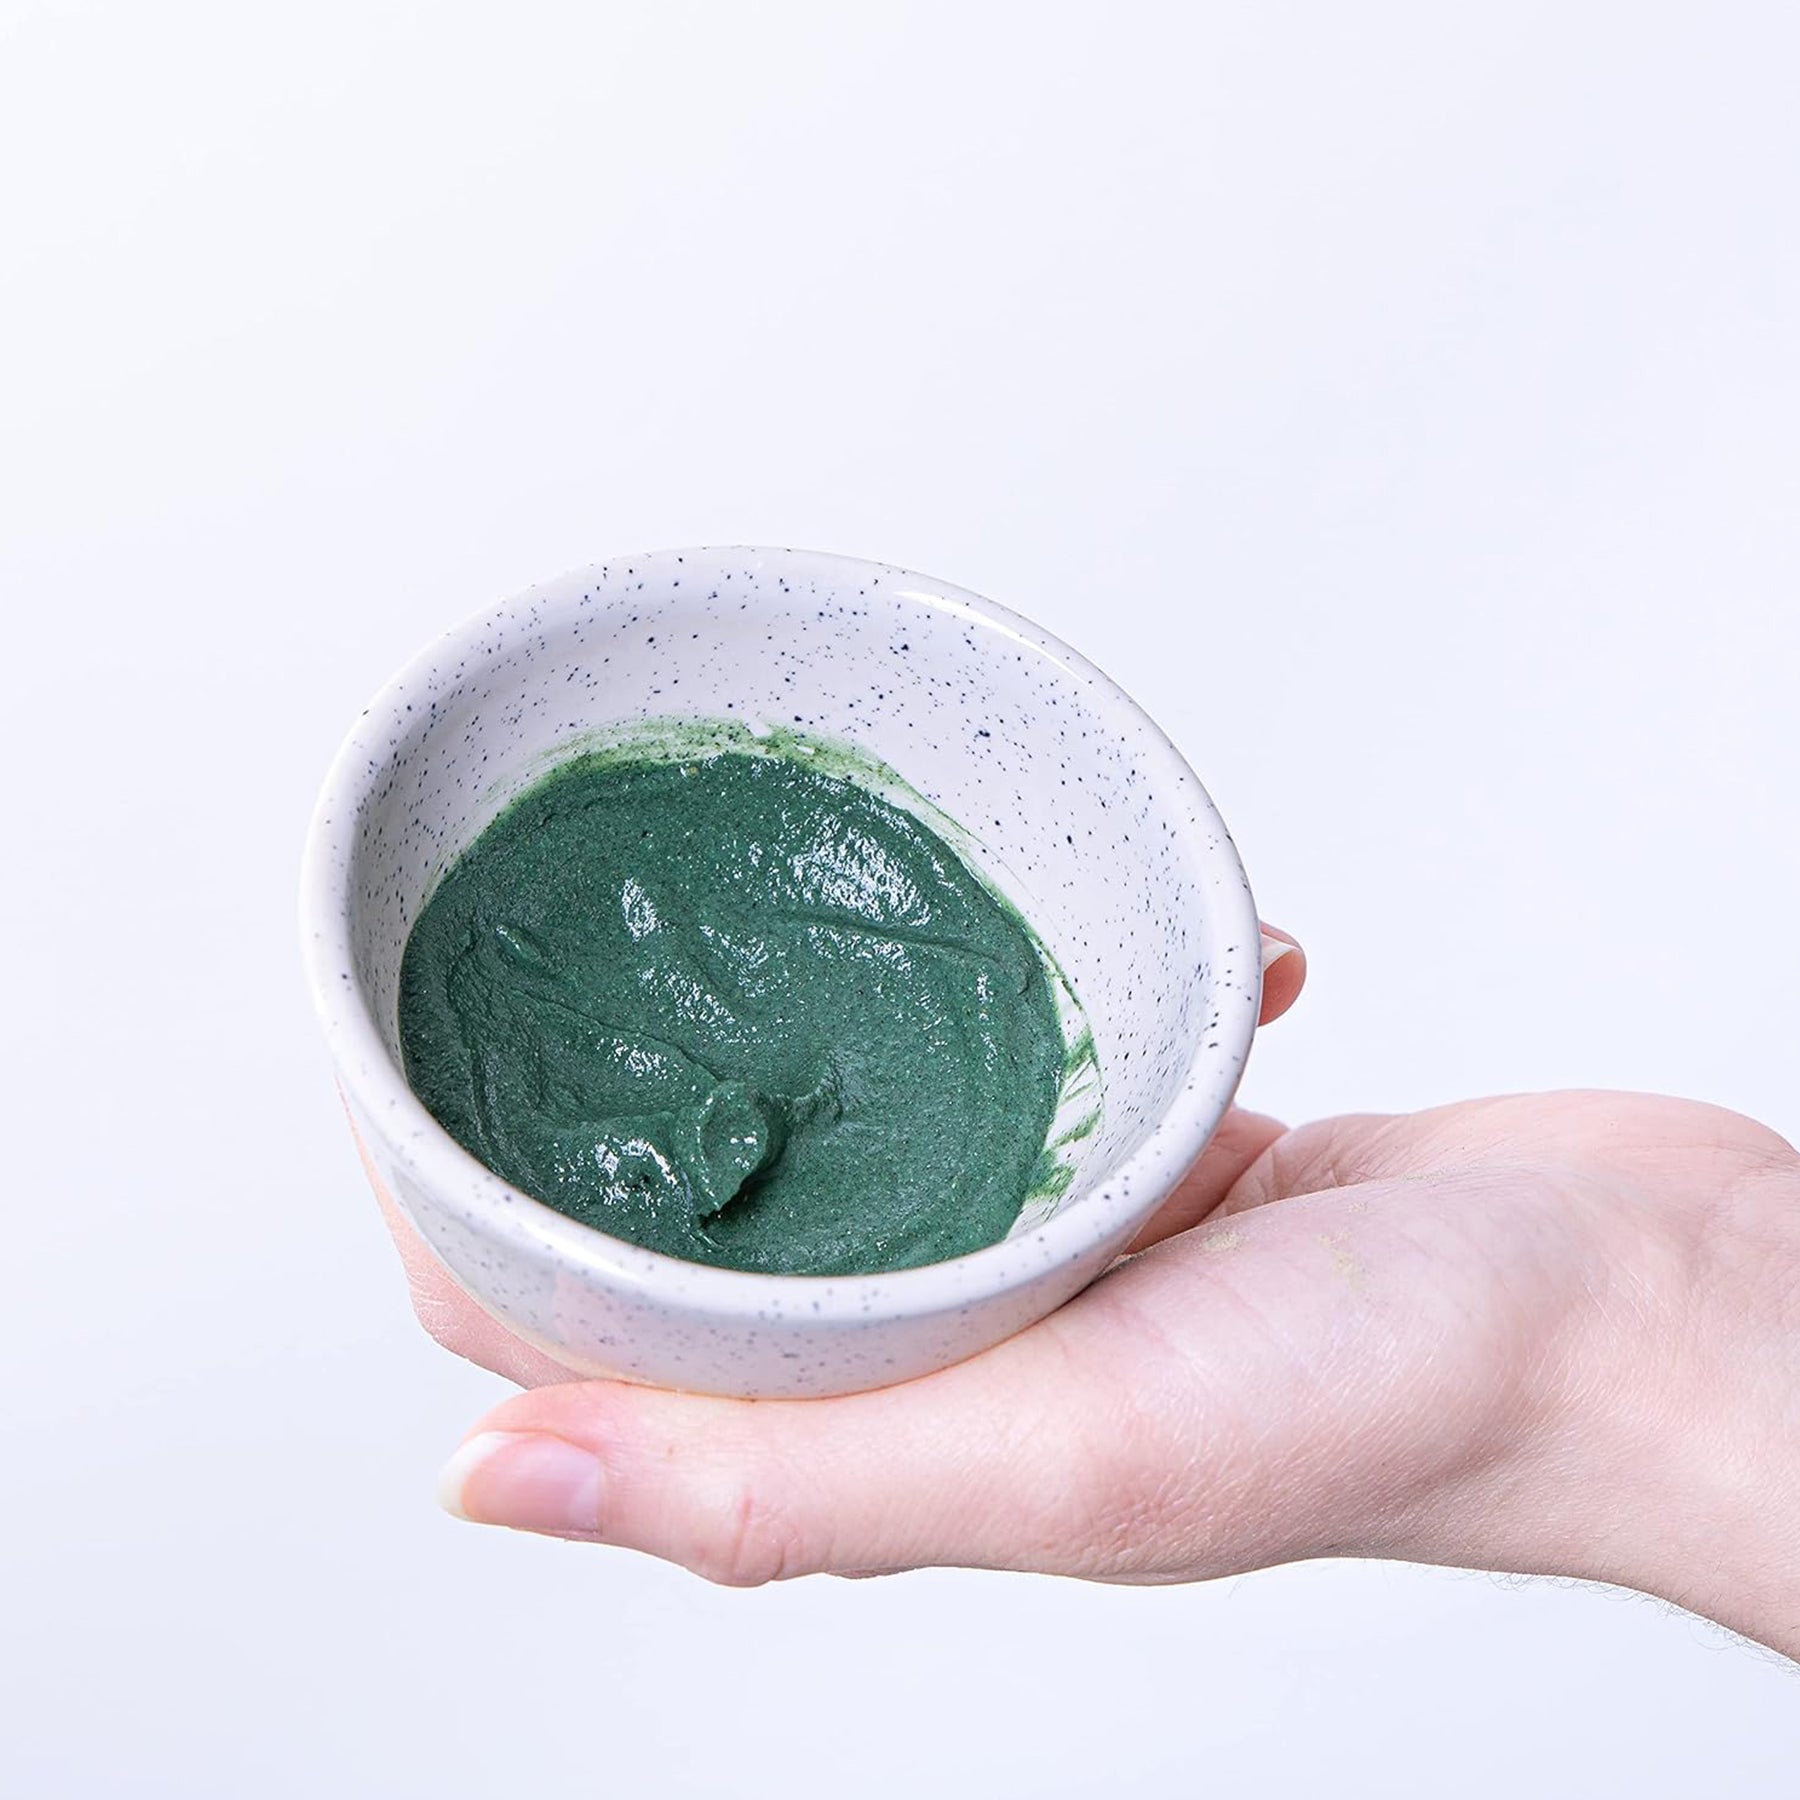 Organic Purifying Green Face Mask with Ginkgo and Lucuma